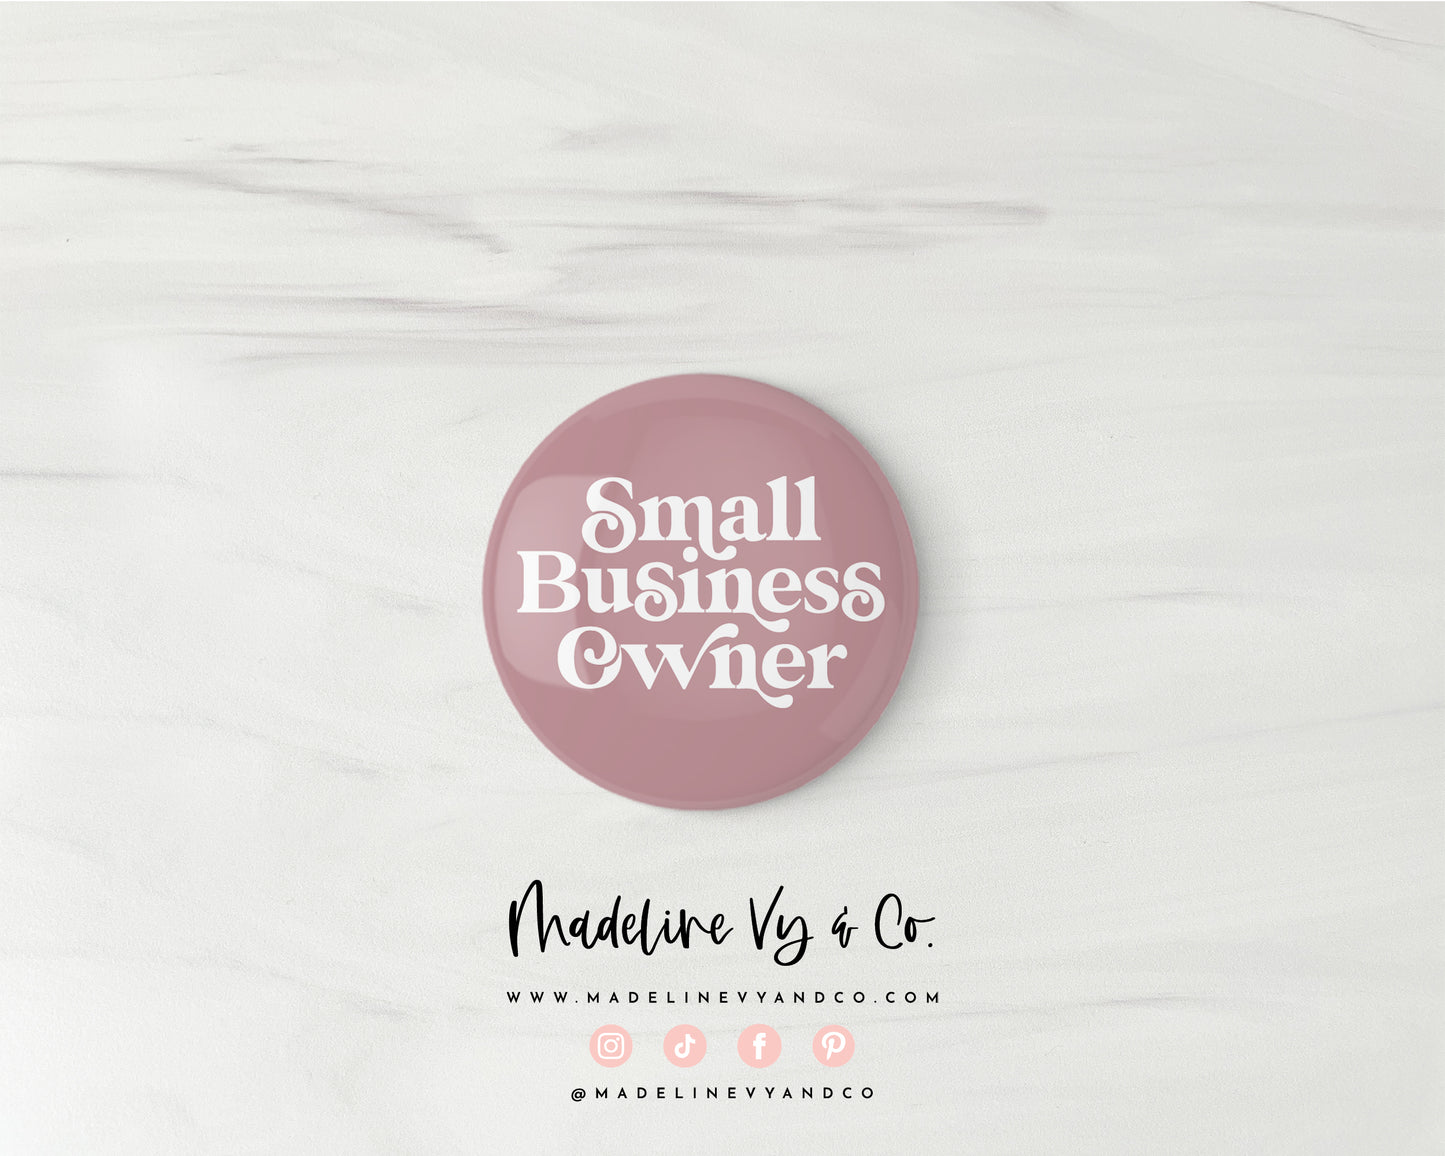 Small Business Owner Badge Pins, Magnets, Keychains